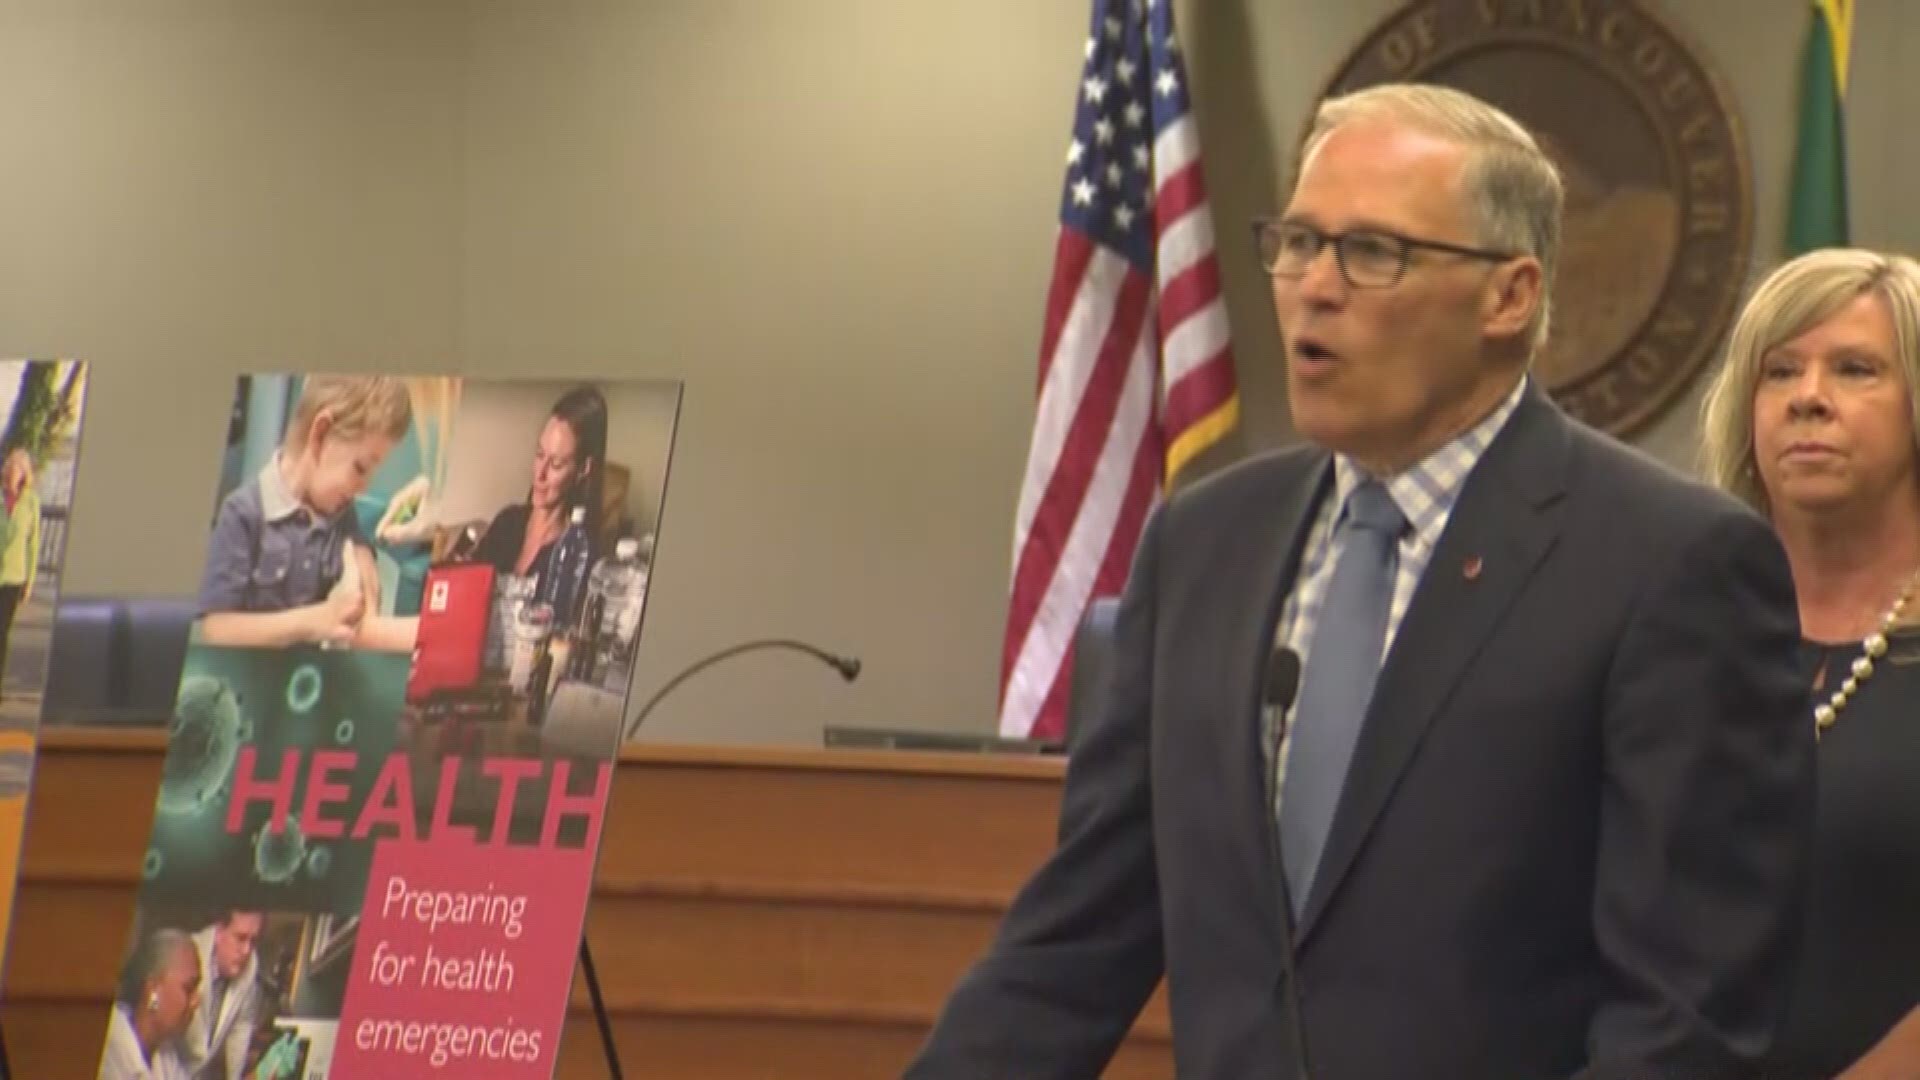 Gov. Inslee was in Clark County Friday morning for the official signing ceremony, where over 70 cases of measles were reported through March. Most of those people were not vaccinated.